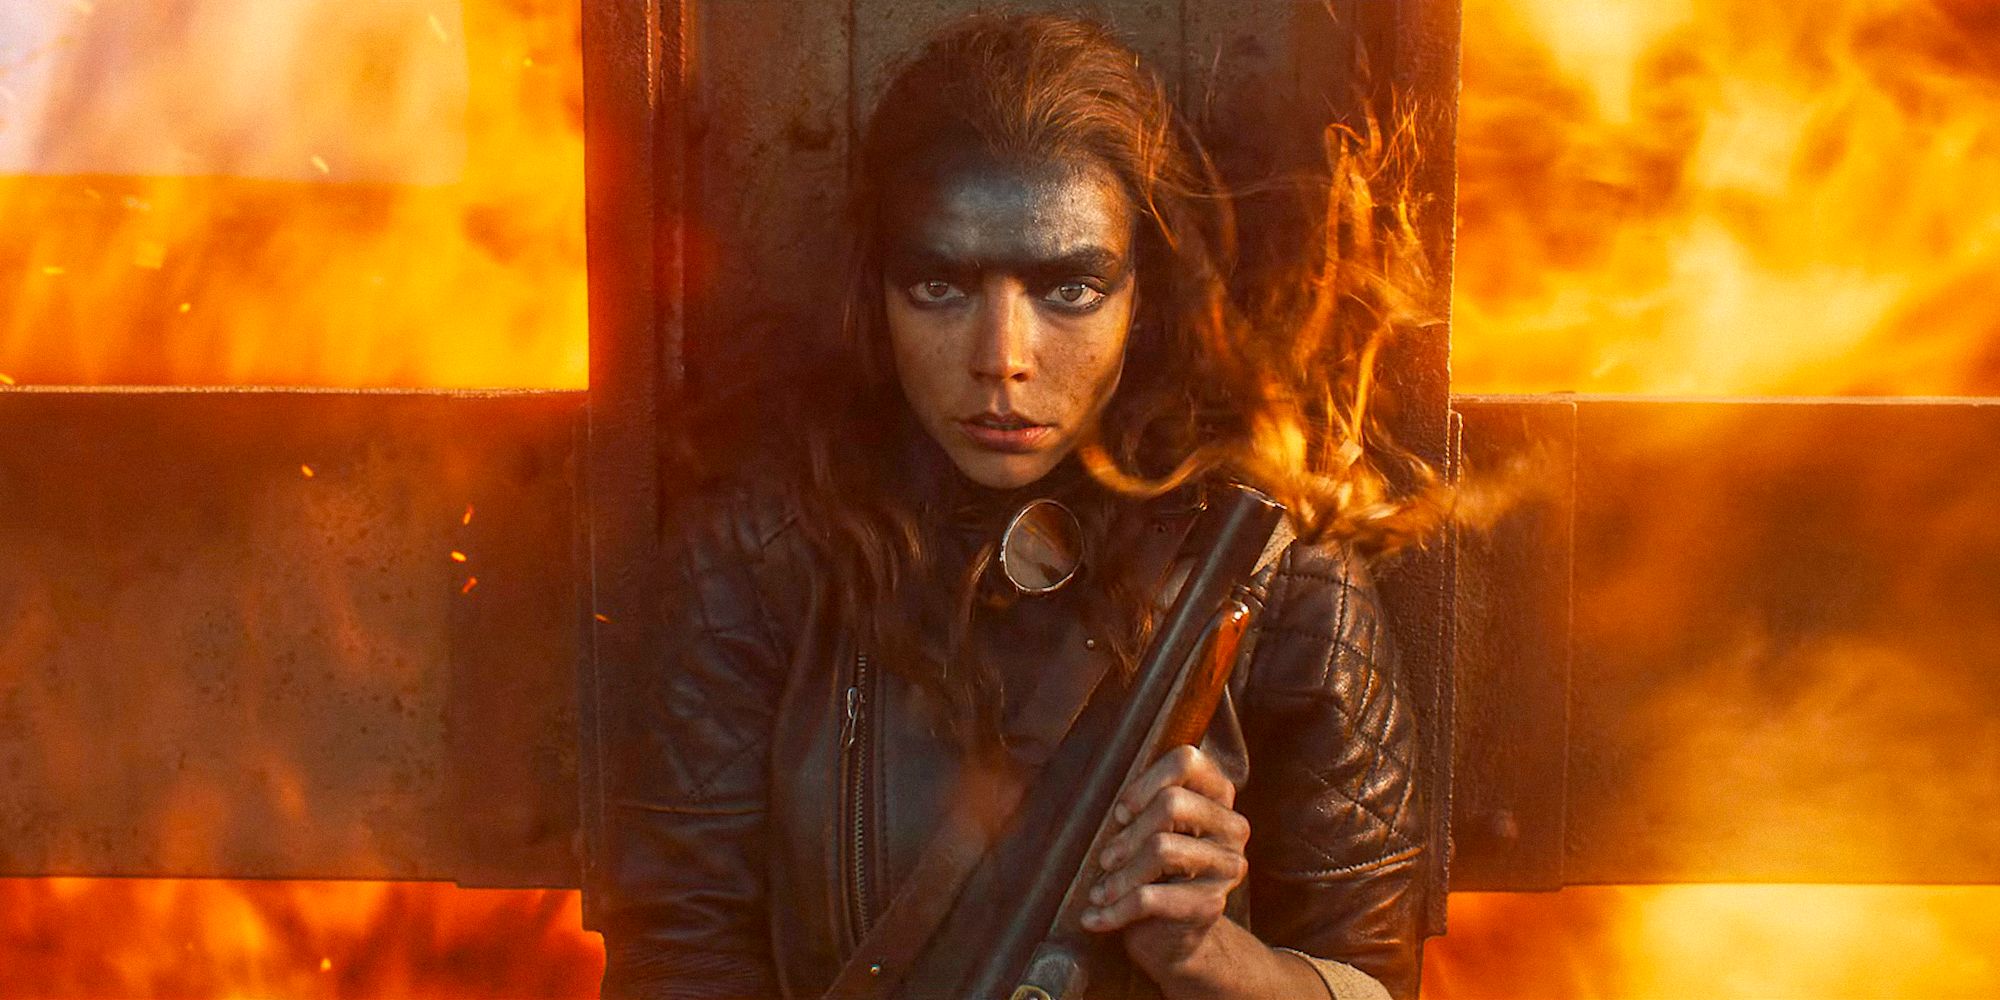 Who Better?: Furiosas Mad Max Cameo Actor Revealed By Director